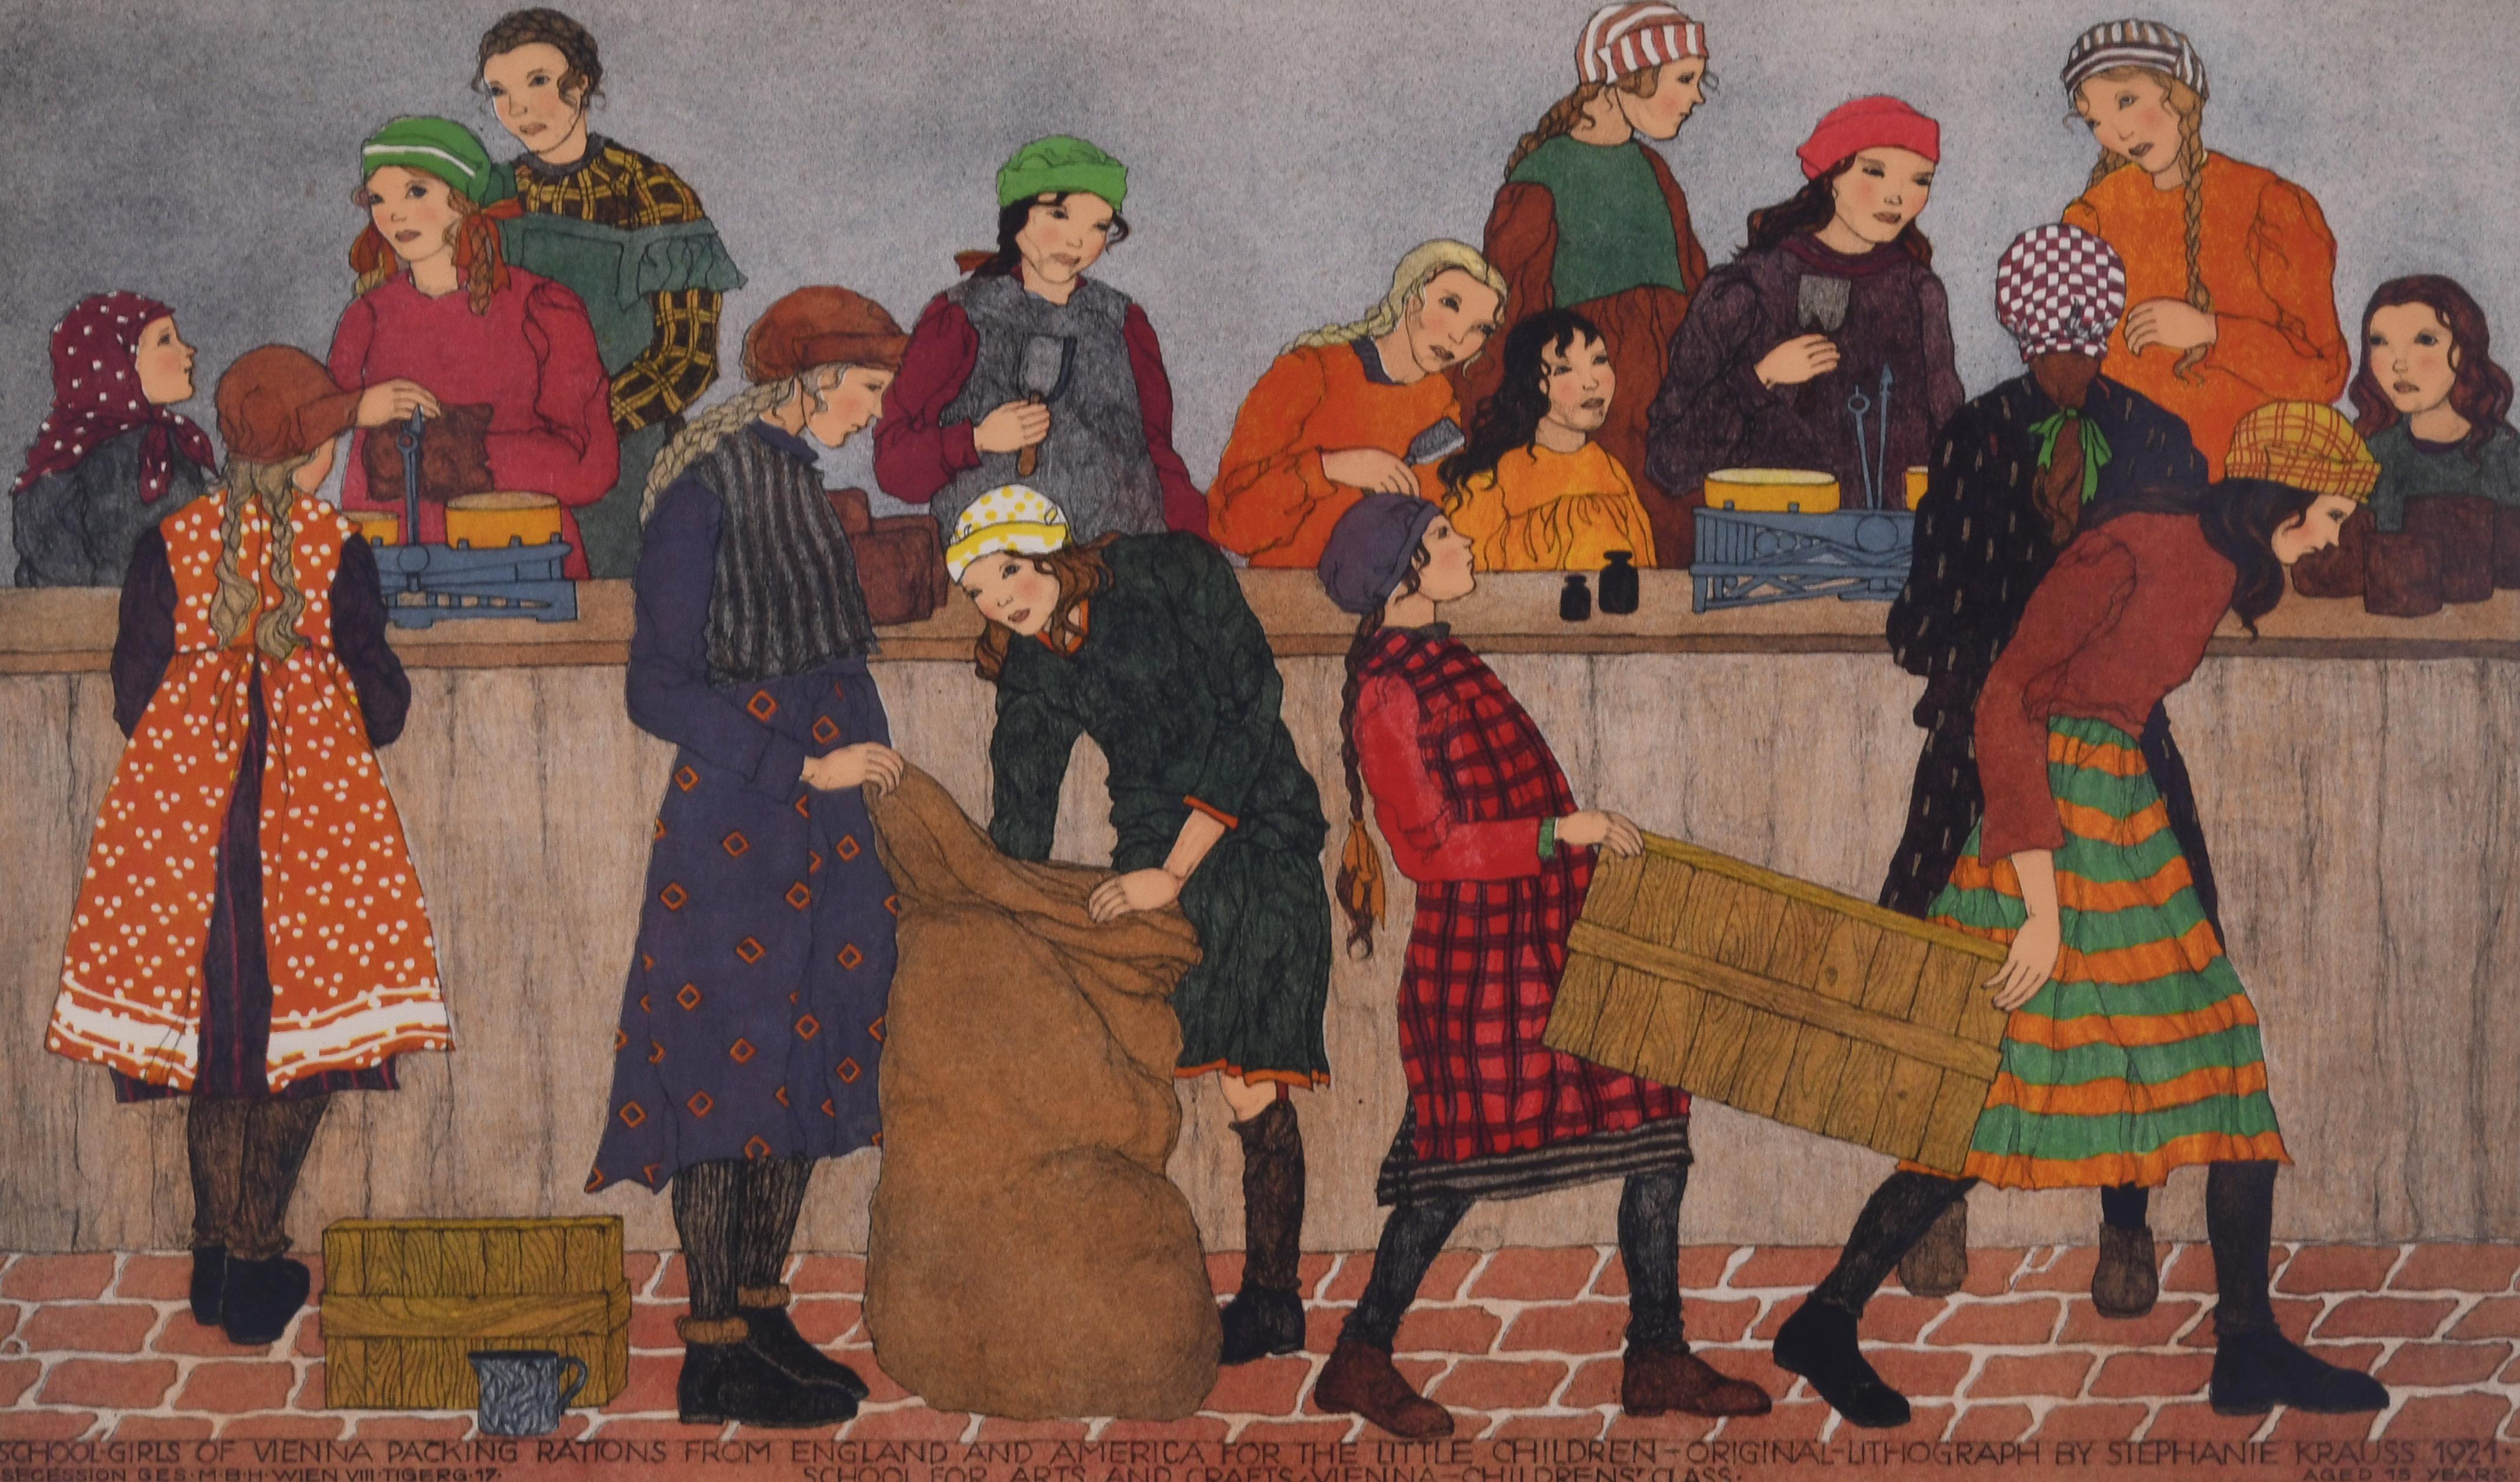 School Girls of Vienna Packing Rations from England and America for the Children - Print by Stephanie Kraus